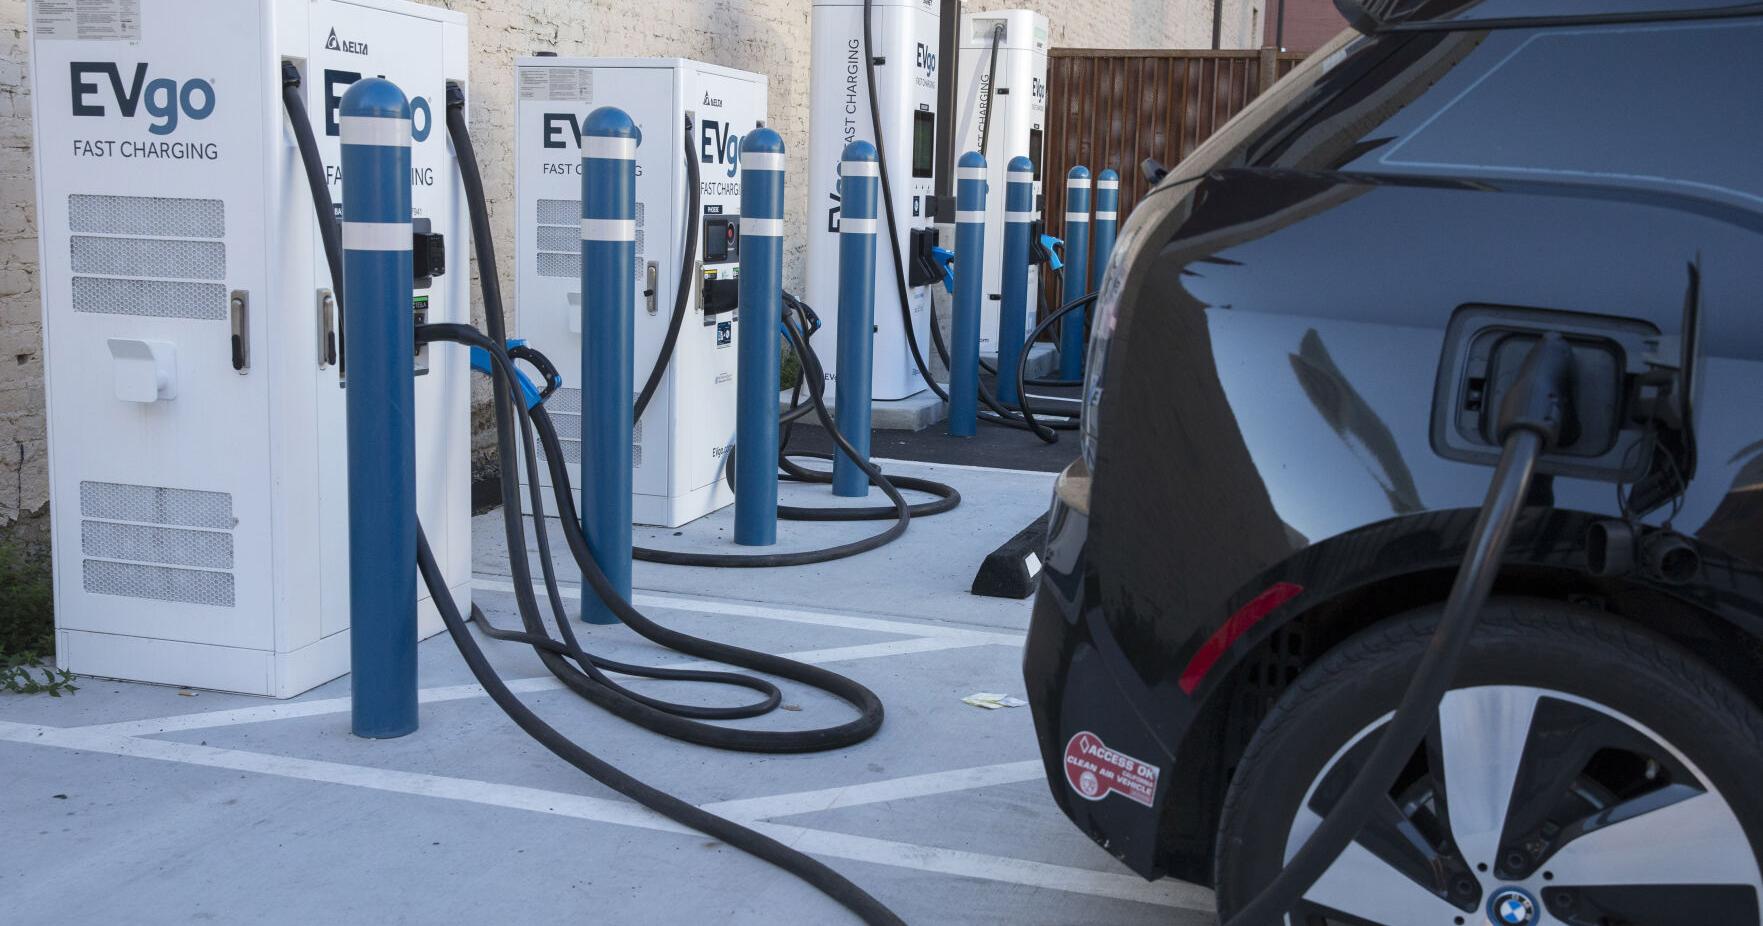 Is California's infrastructure ready for an electric vehicle future?